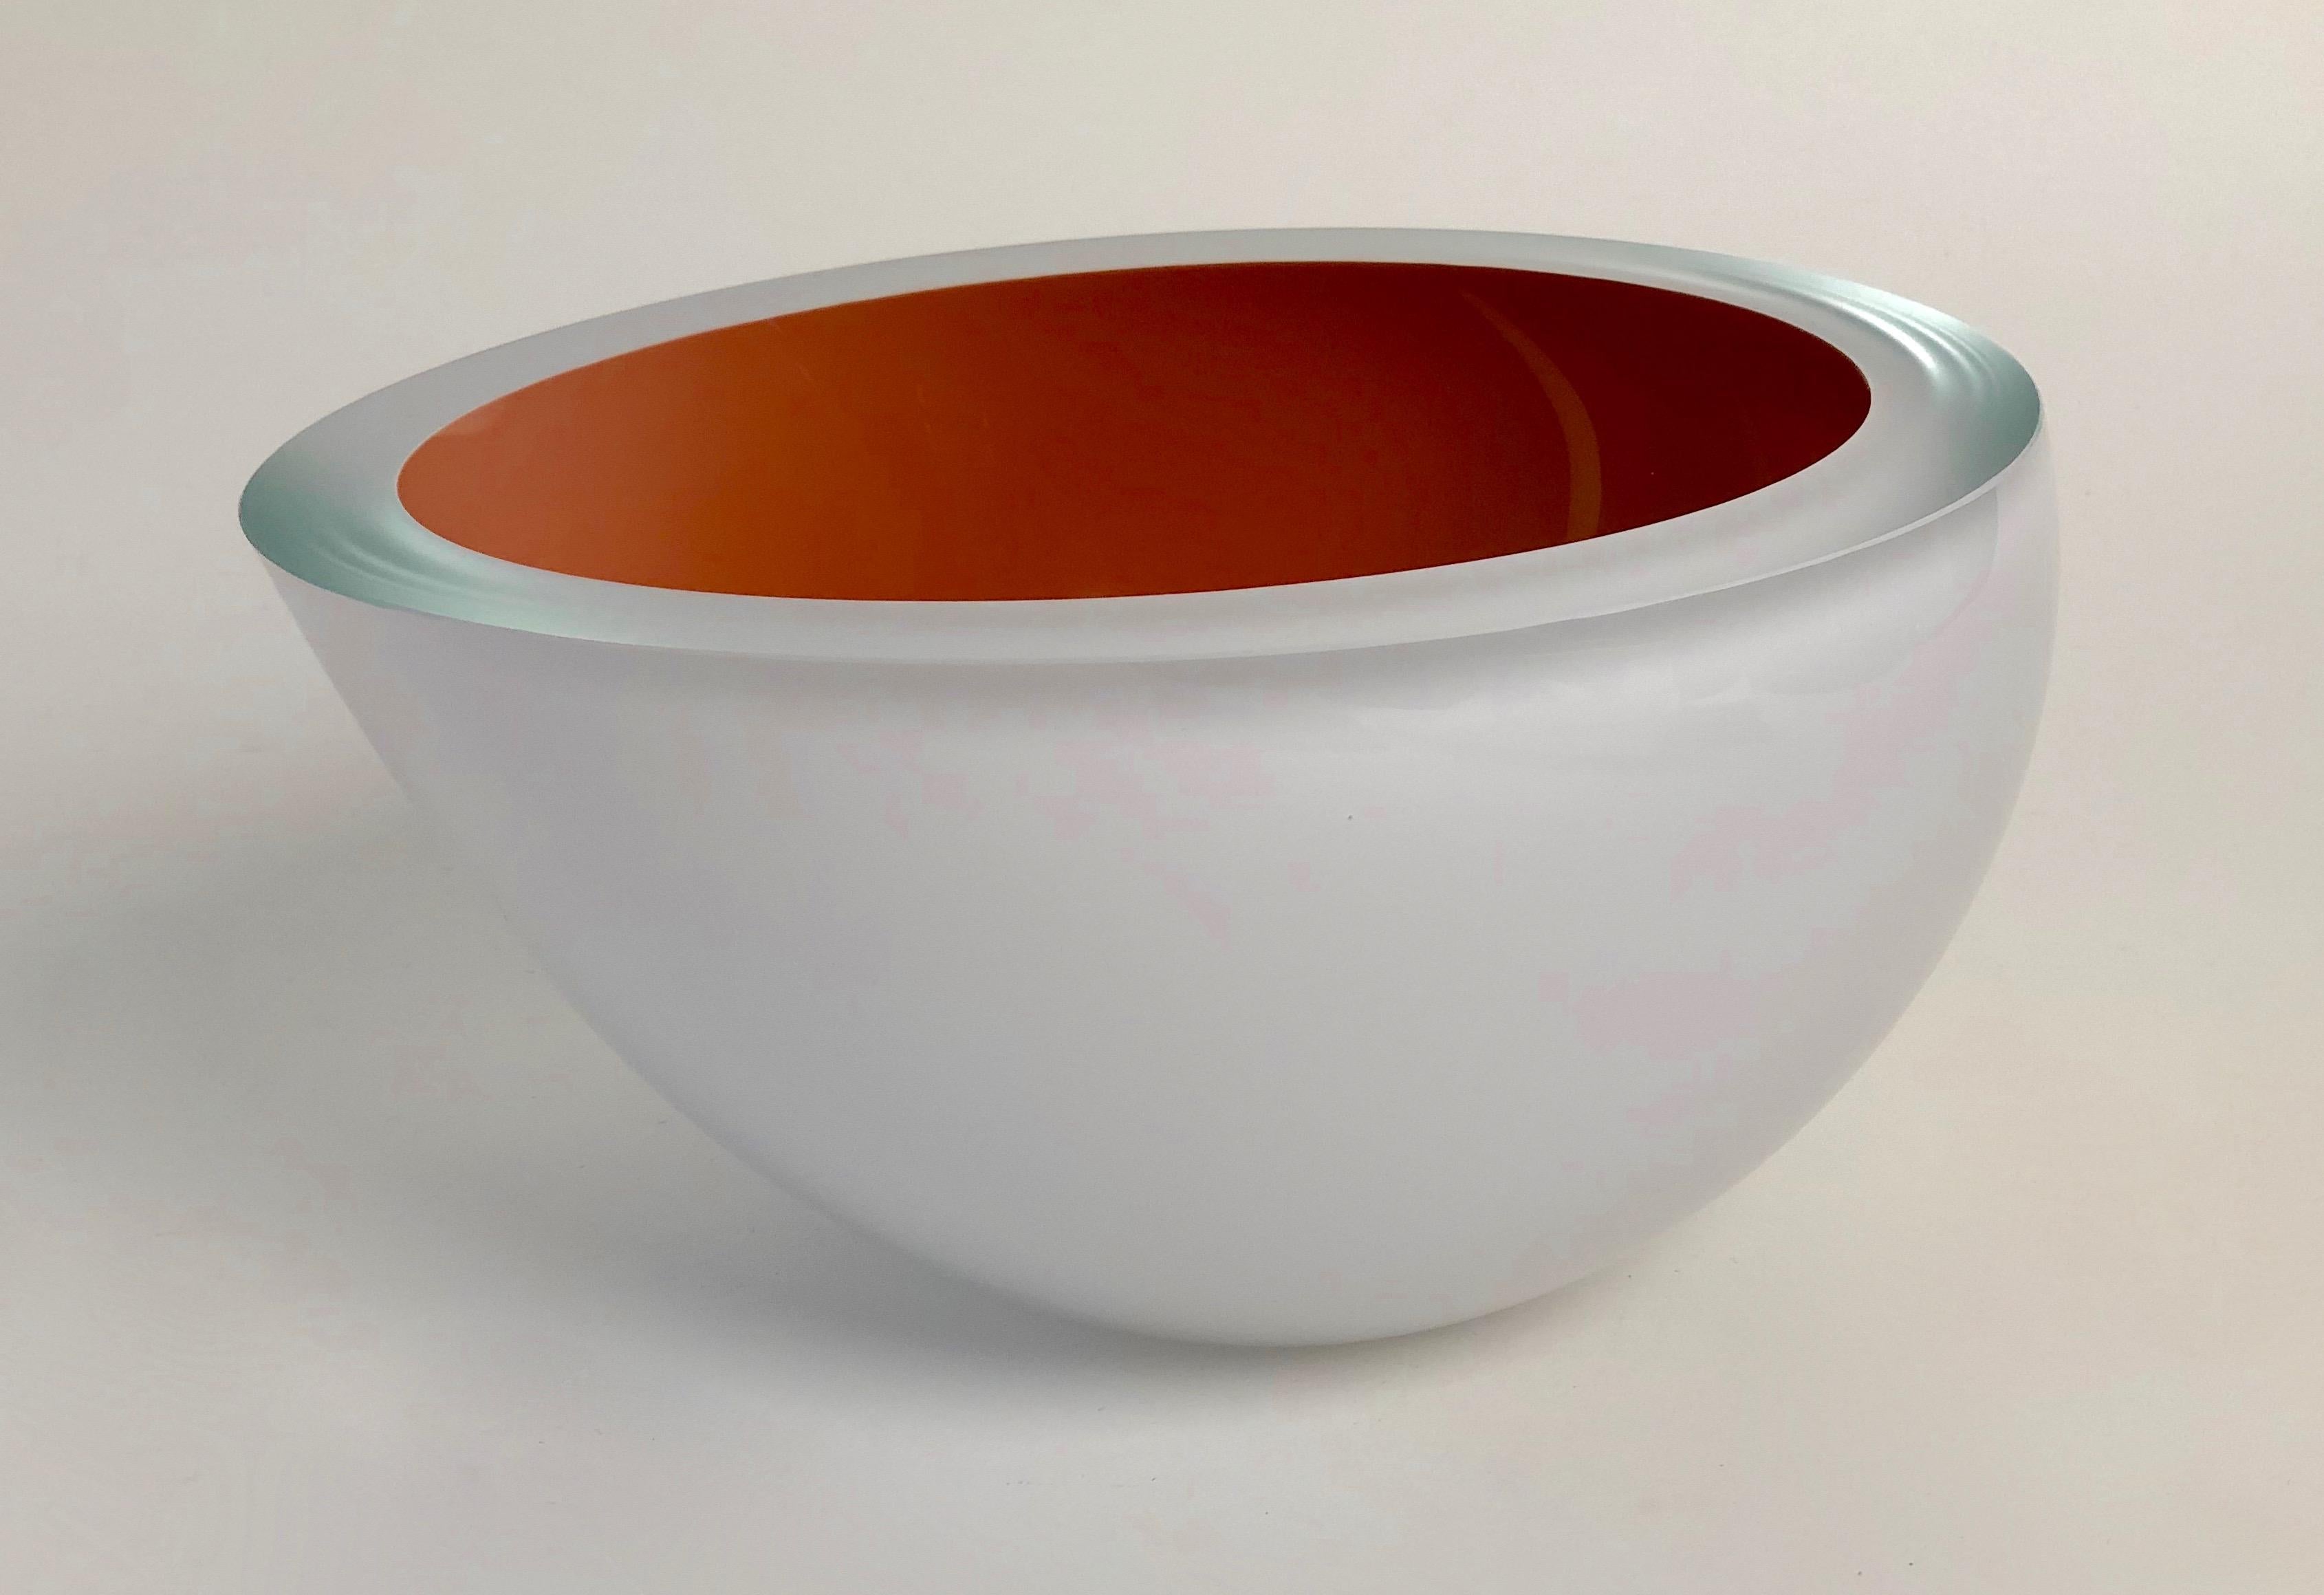 Other Contemporary Studio Glass Bowl in Coral Color, Made in the Czech Republic, 2010 For Sale